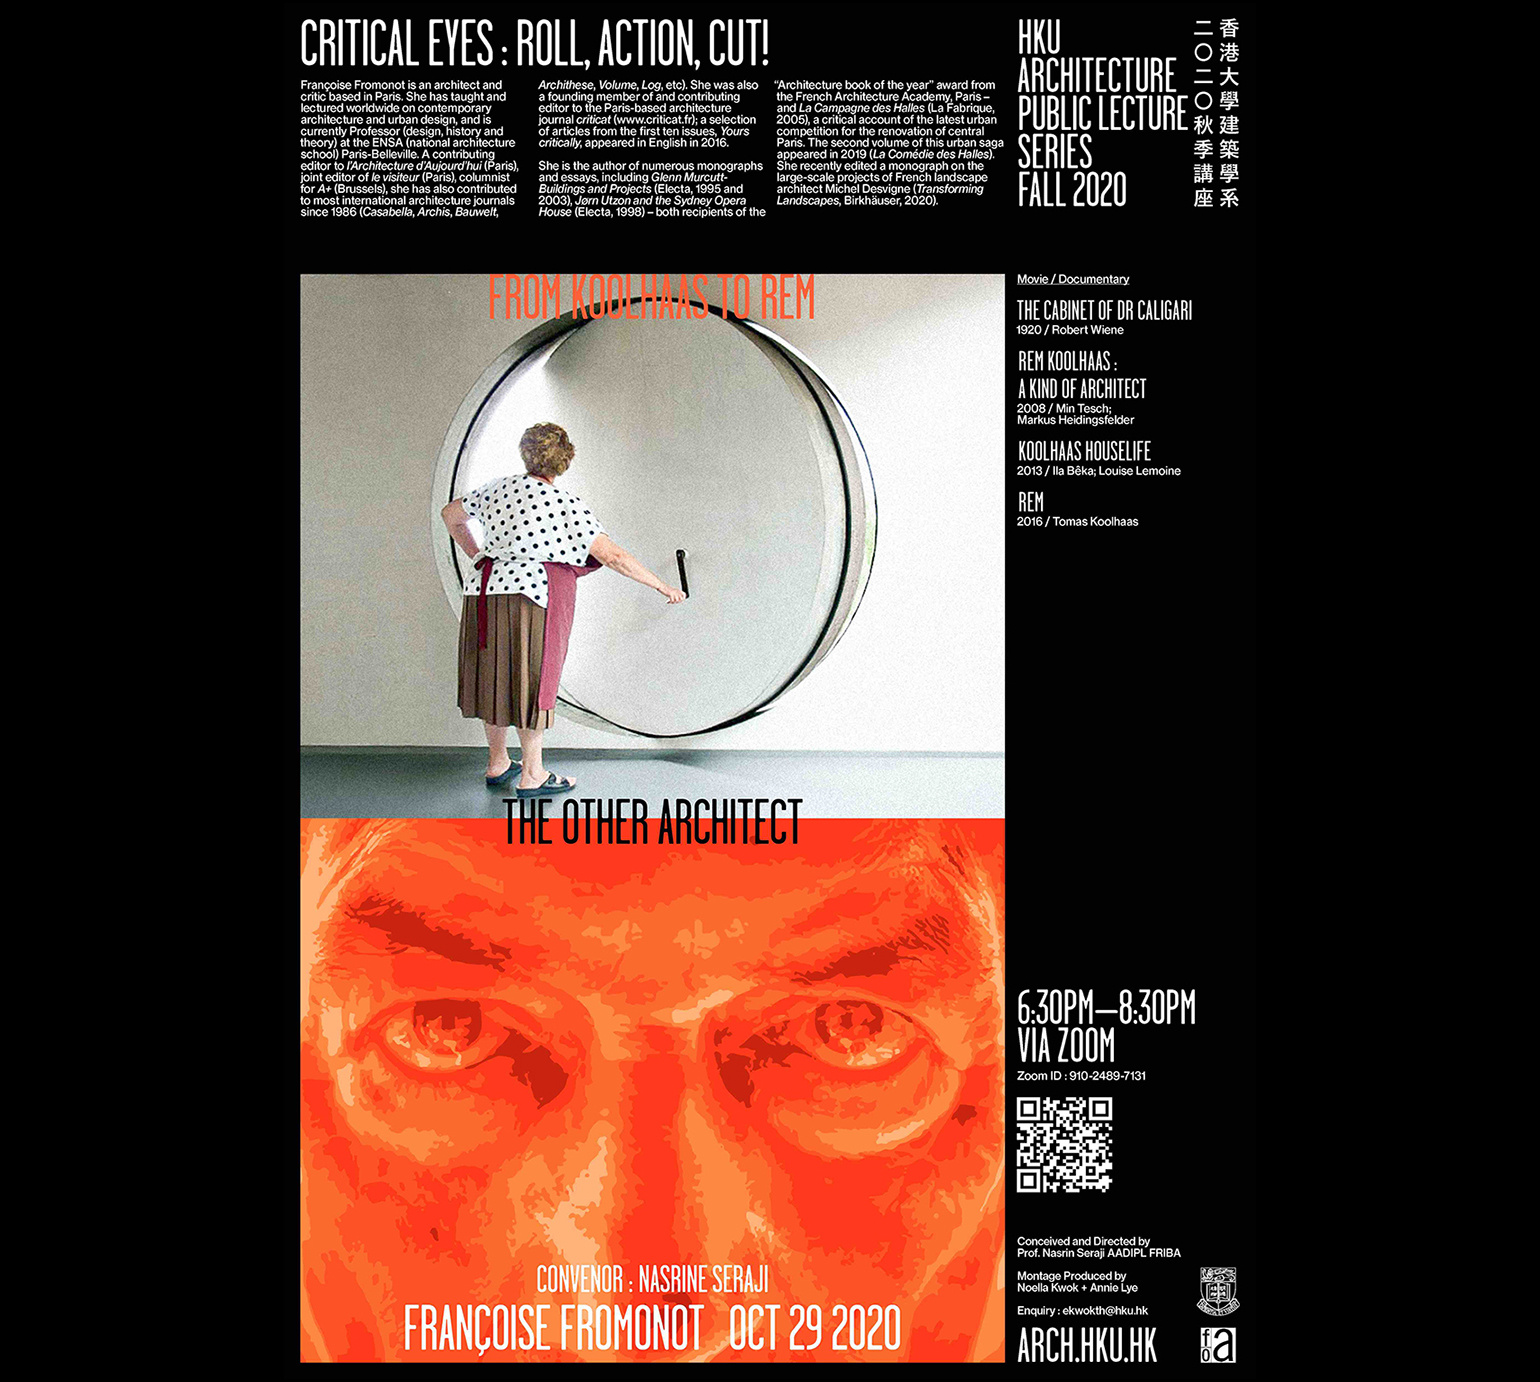 Critical Eyes: Roll, Action, Cut! - 'From Koolhaas to Rem - the other architect' by FranÇoise Fromonot and Nasrine Seraji 